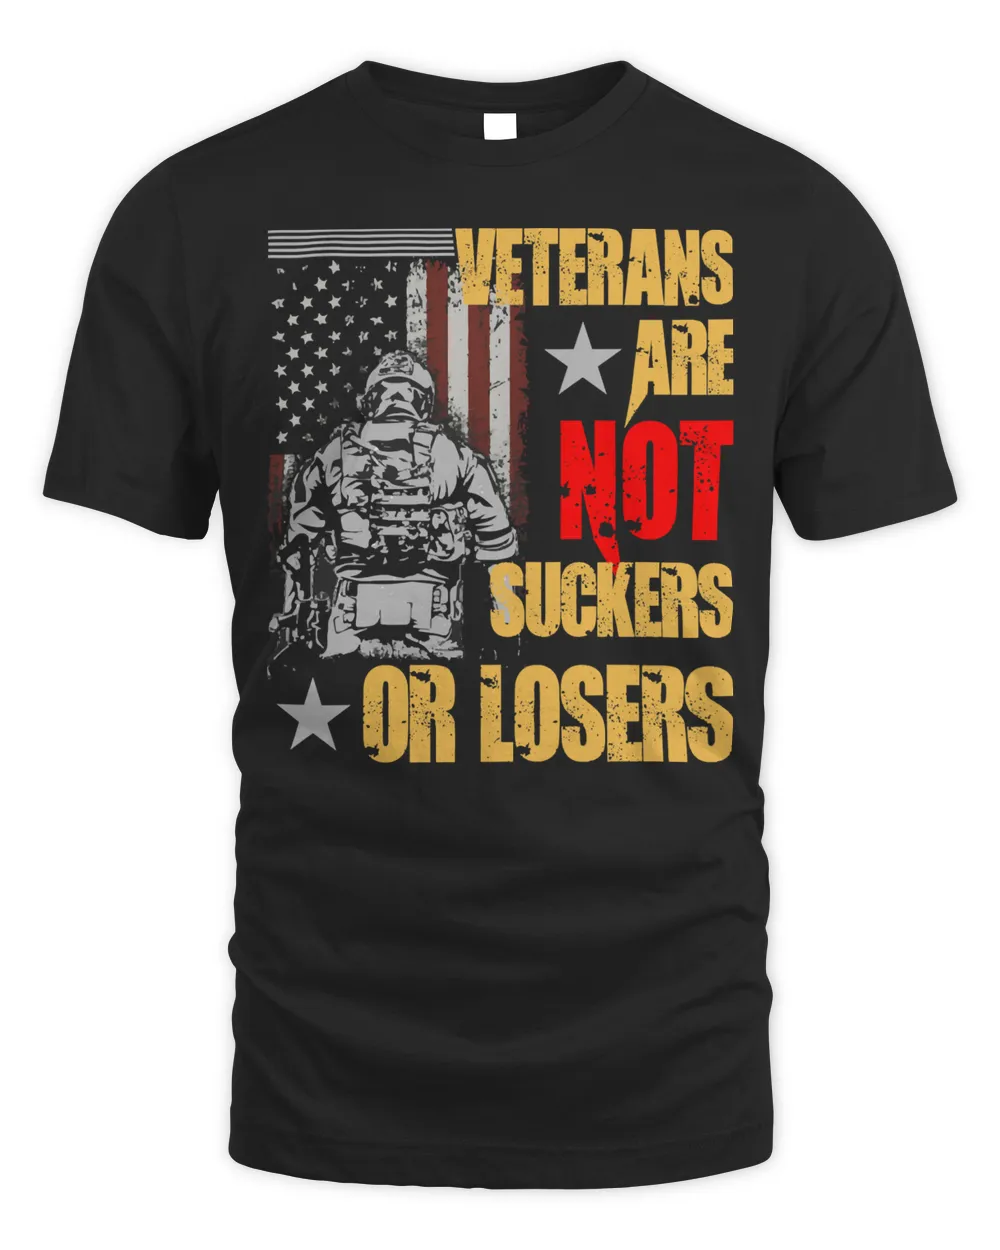 Veteran Veterans Day Are Not Suckers Or Losers 98 navy soldier army military